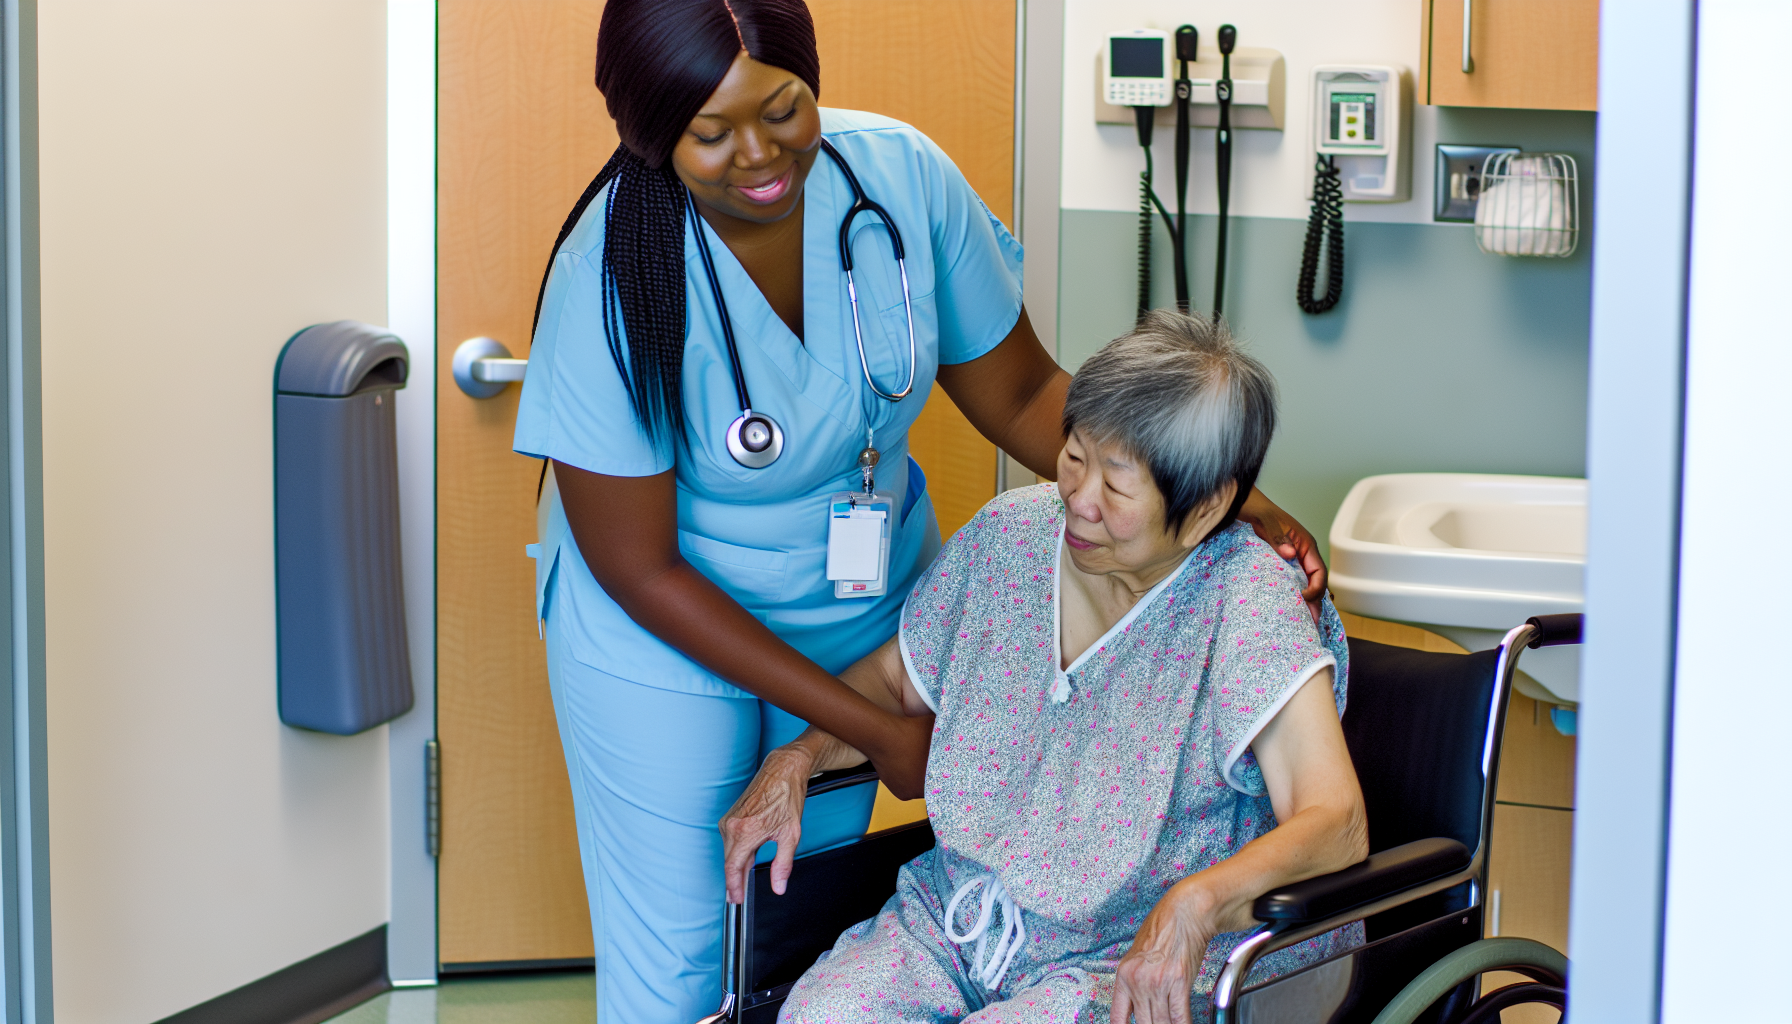 CNA assisting a patient with mobility